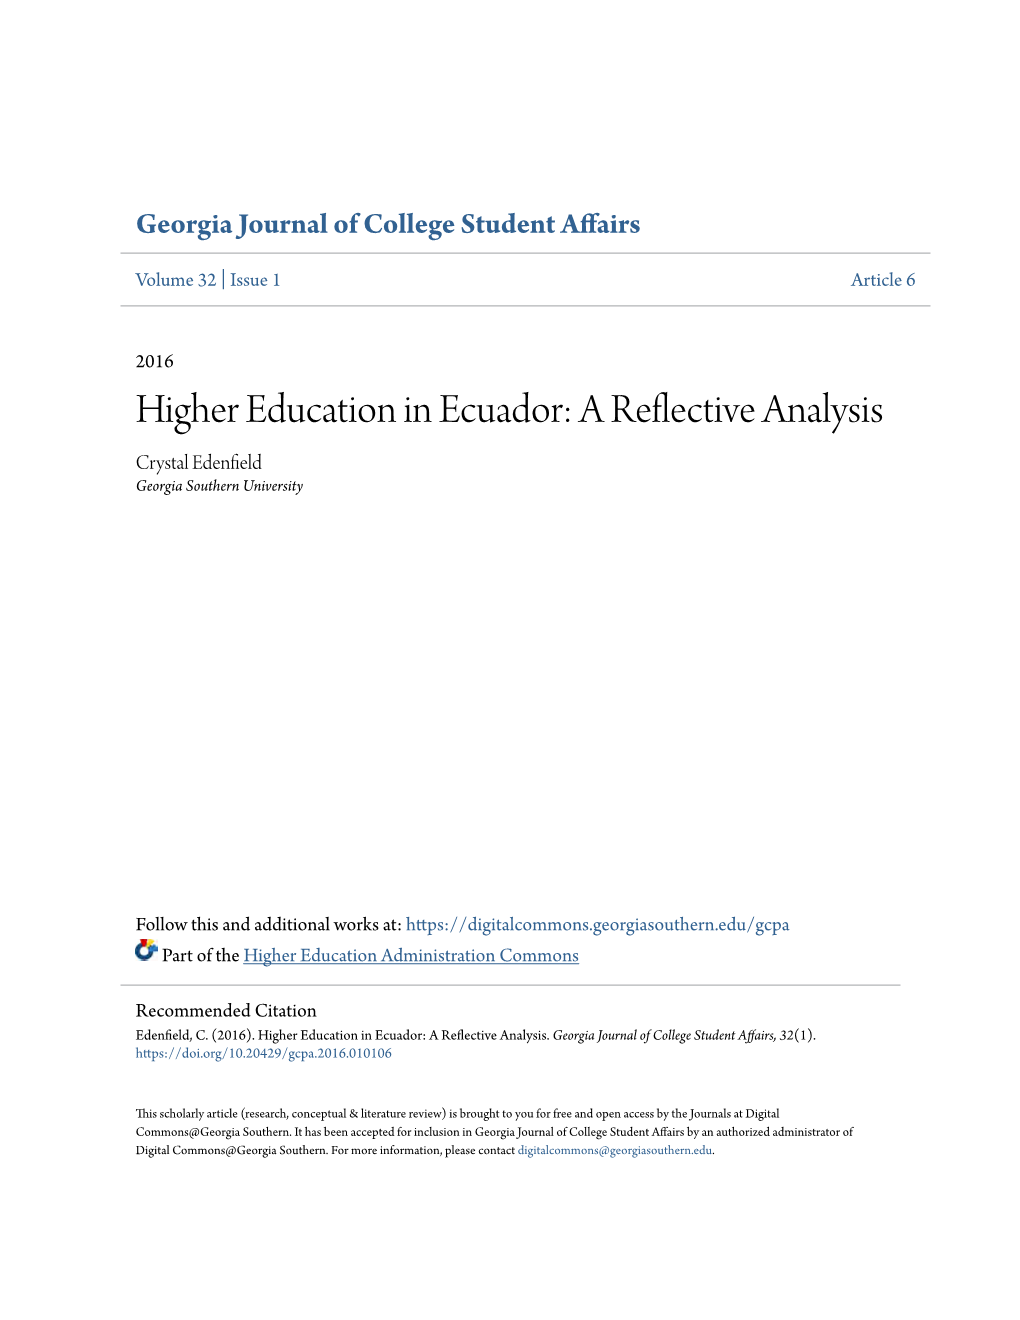 Higher Education in Ecuador: a Reflective Analysis Crystal Edenfield Georgia Southern University